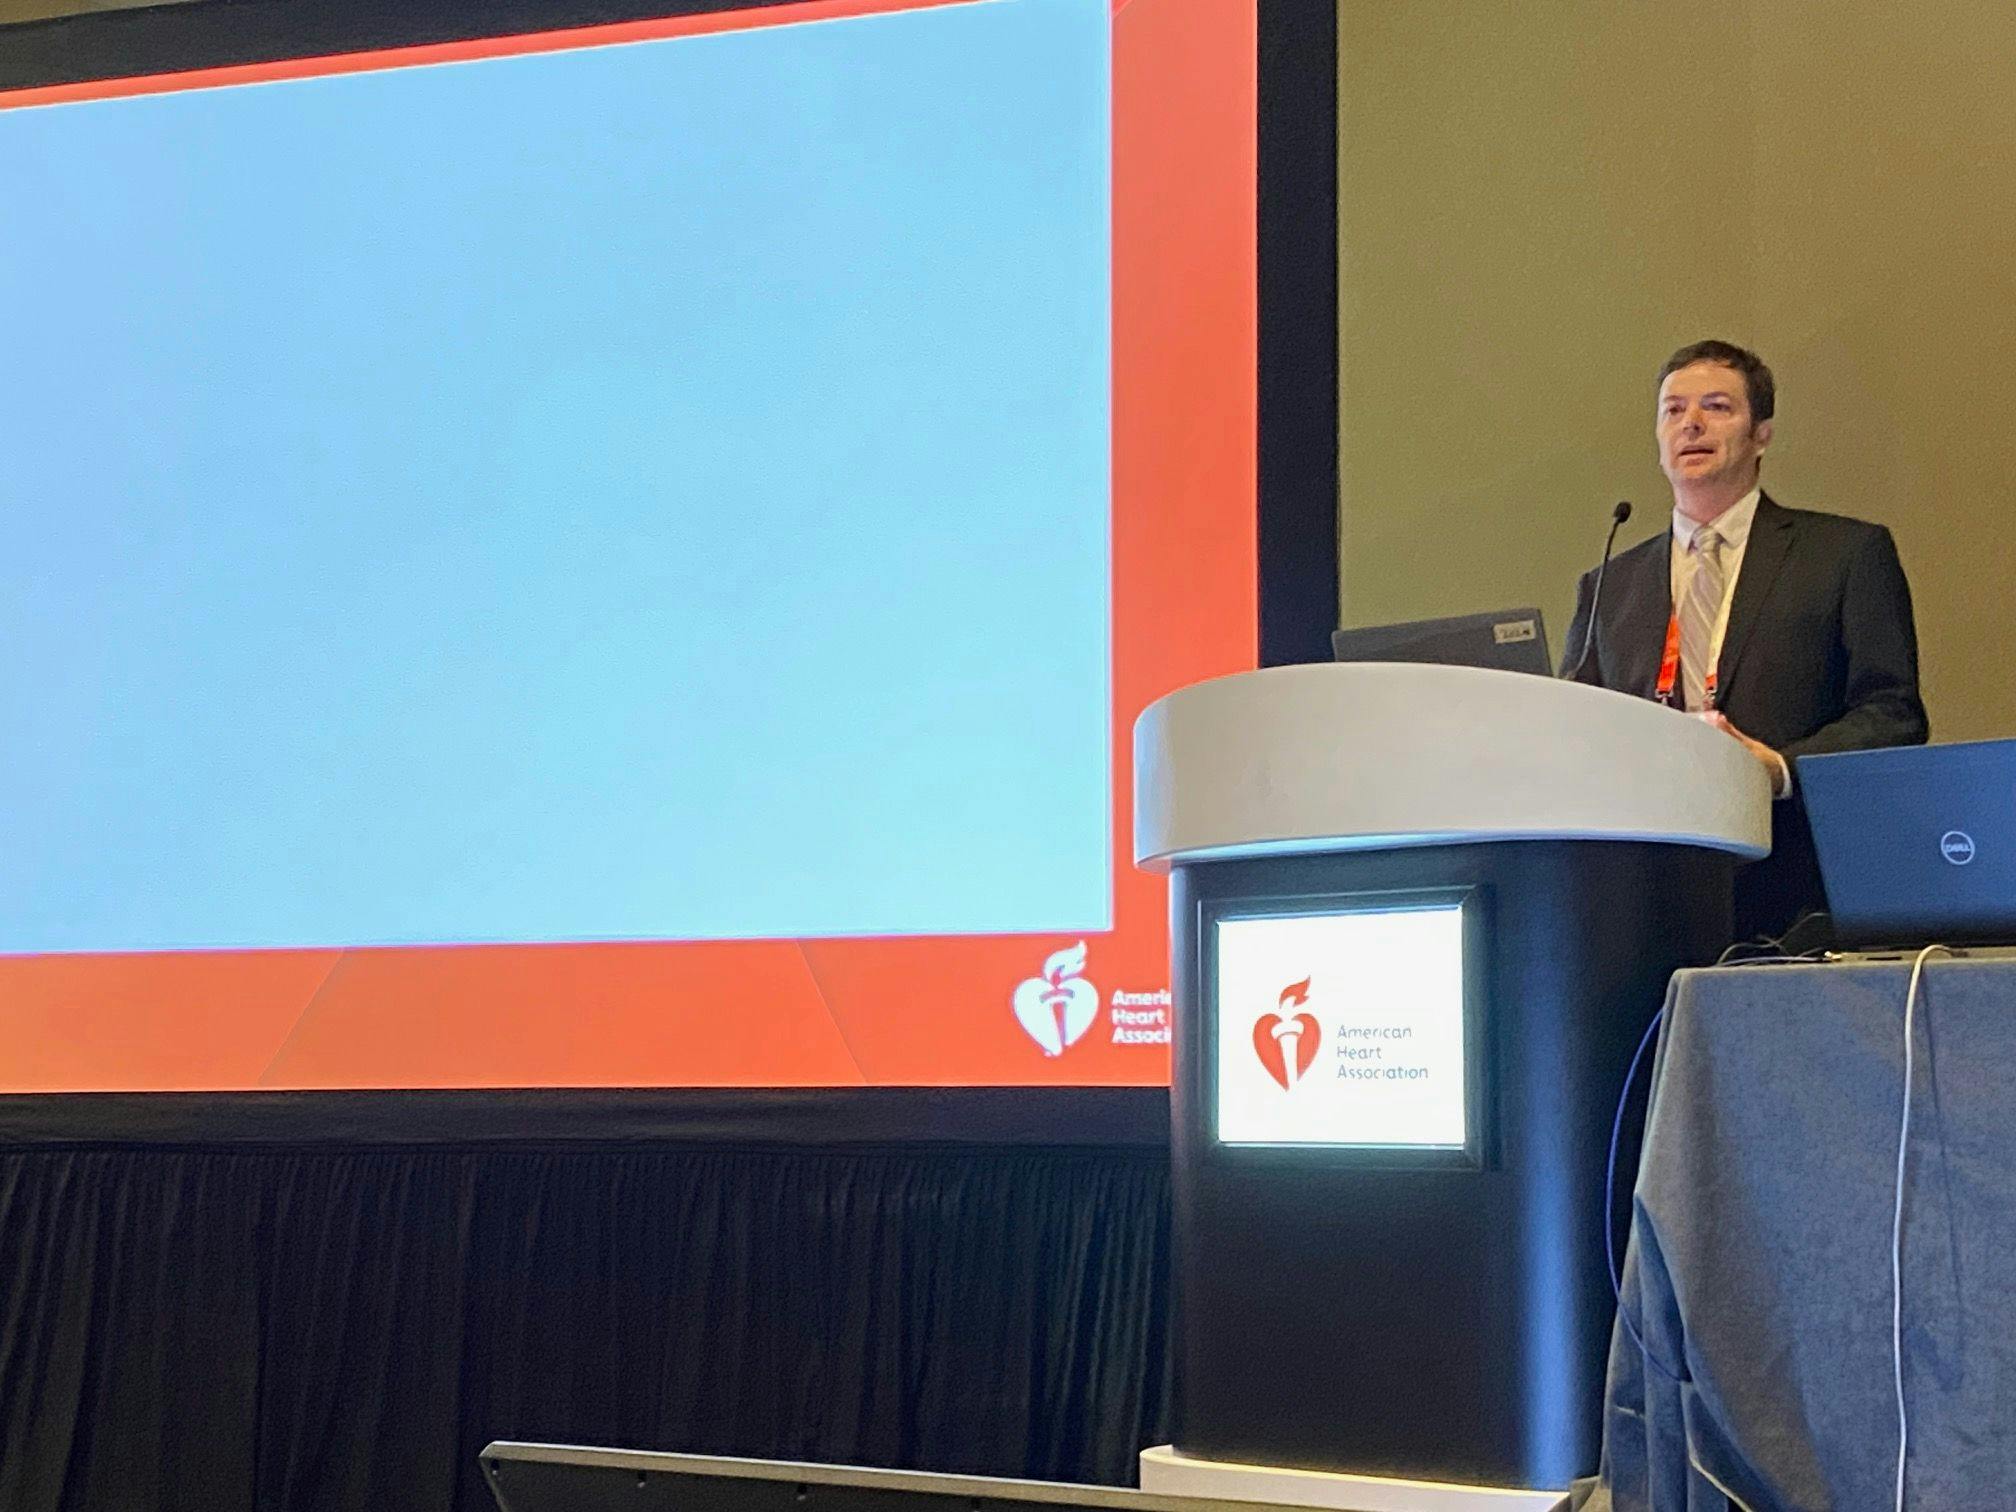 Christopher Babiuch of Cleveland Clinic discusses taking a population health approach to managing patients with heart failure at the American Heart Association Scientific Sessions. (Photo: Ron Southwick)